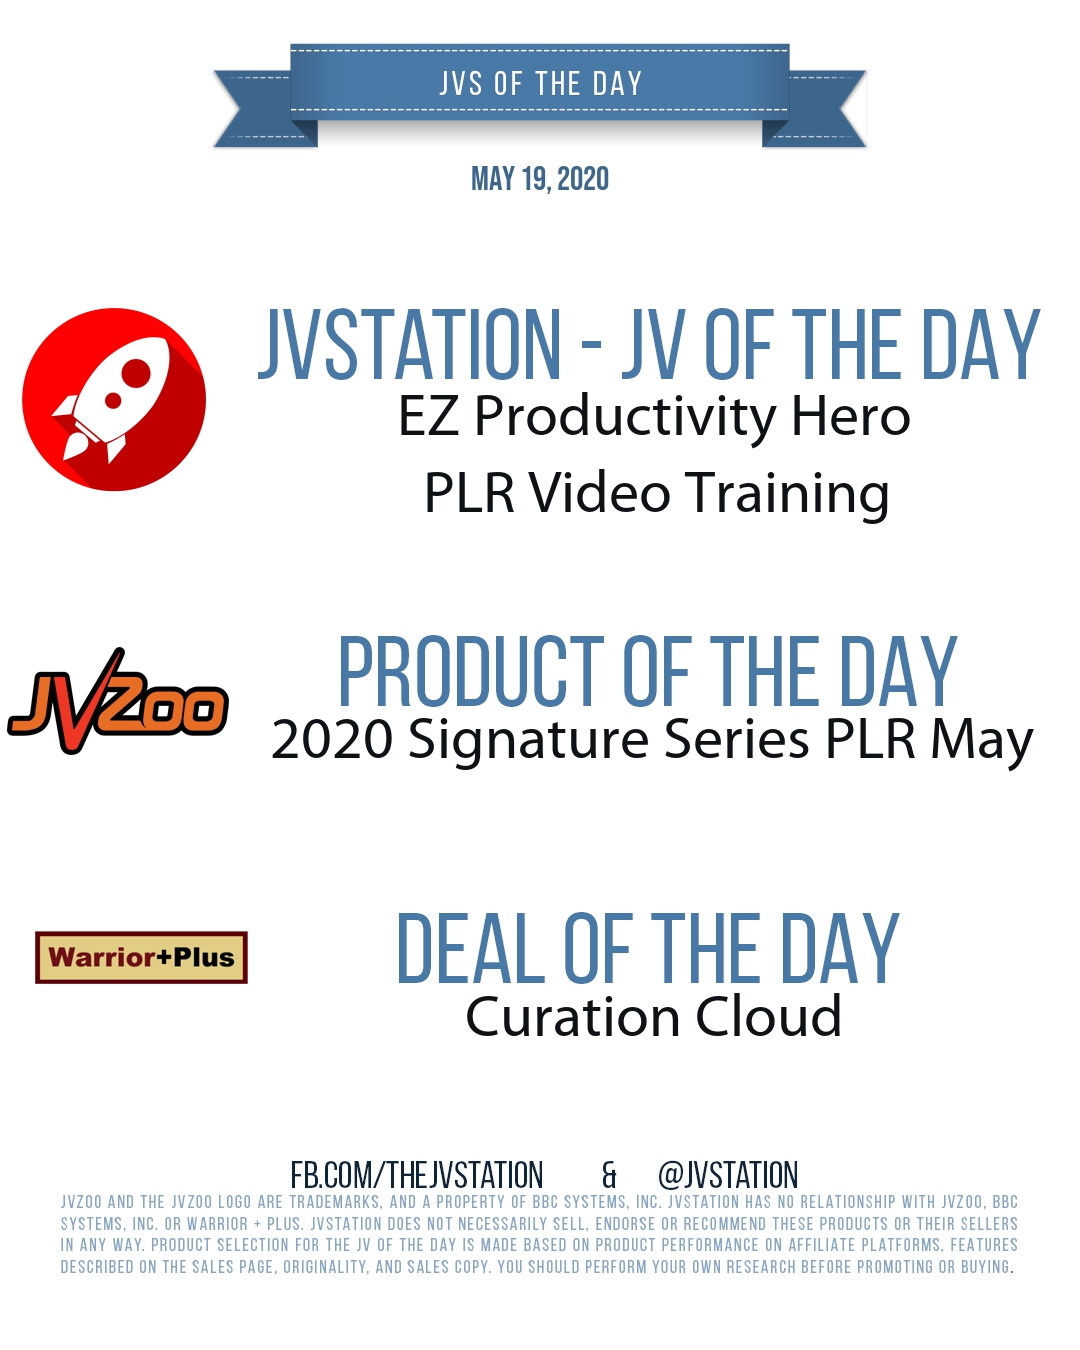 JVs of the day - May 19, 2020